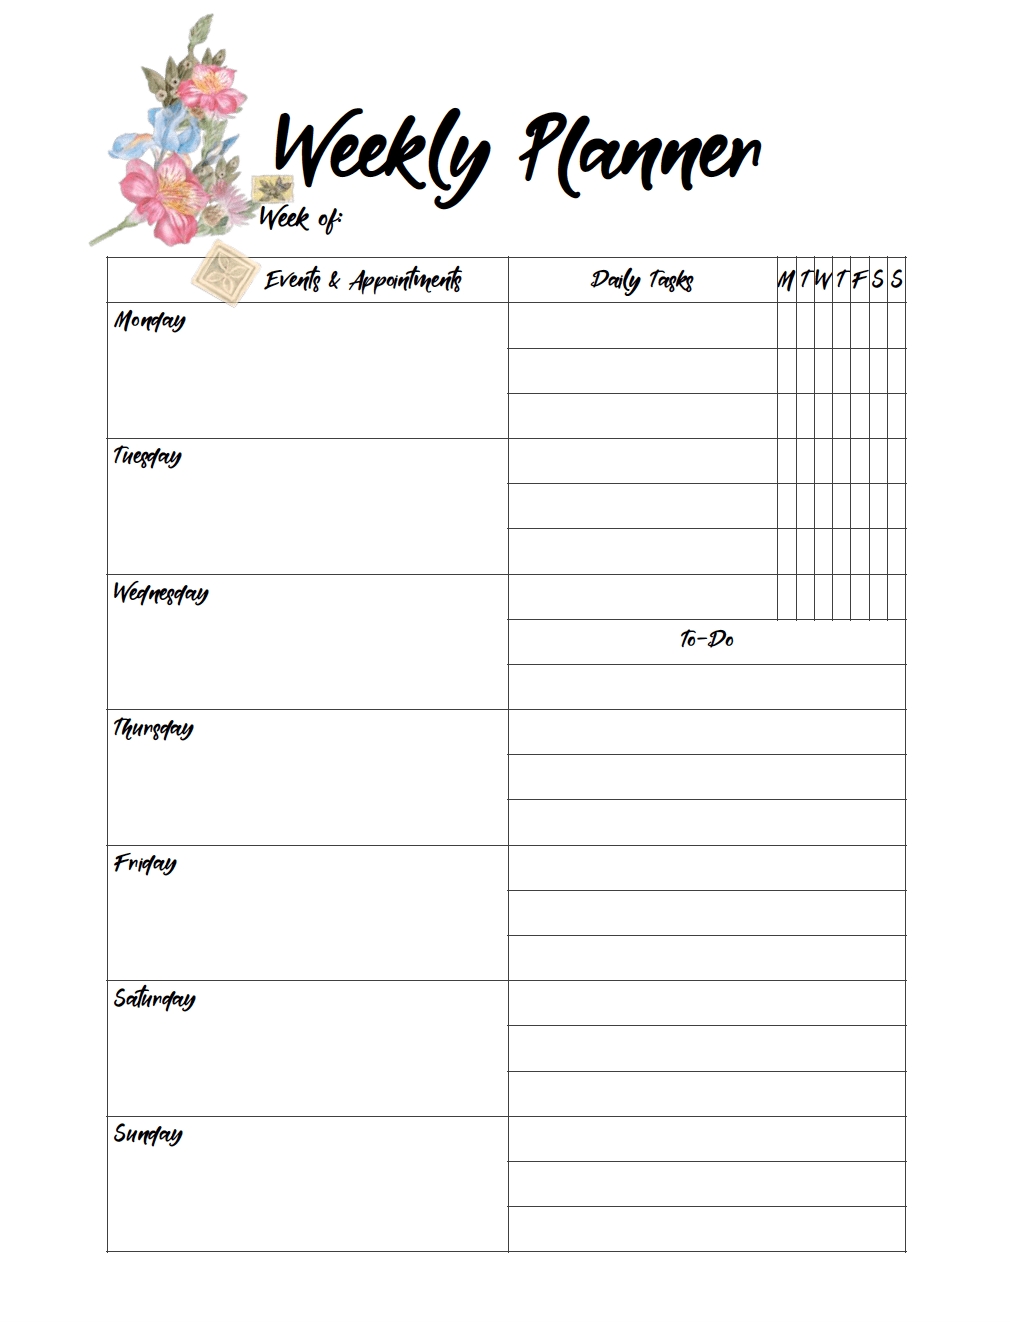 Take Weekly Planner Monday To Friday